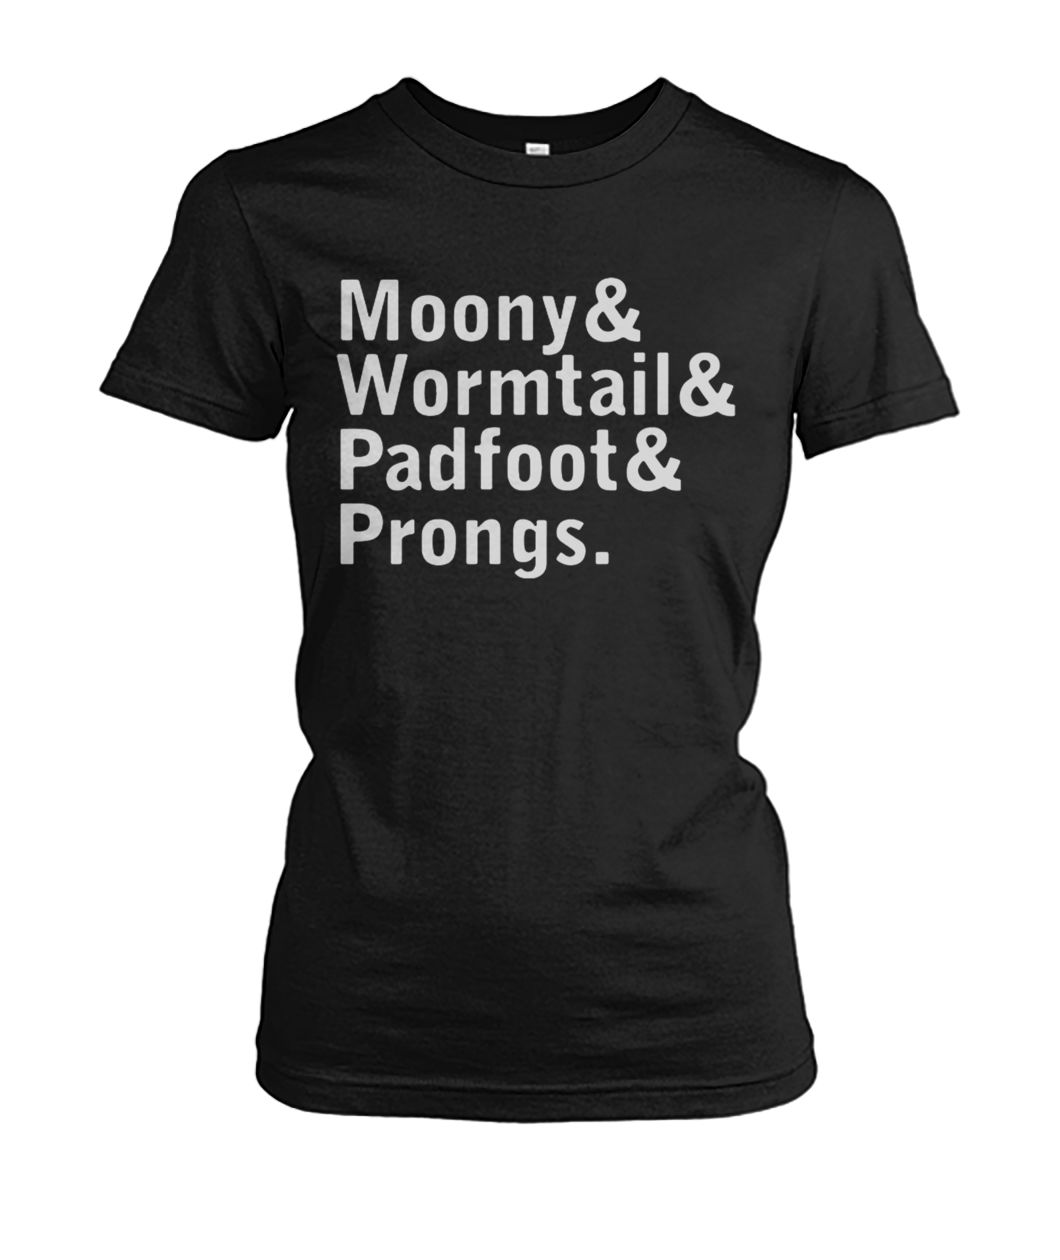 Stranger things moony wormtail padfoot prongs women's crew tee